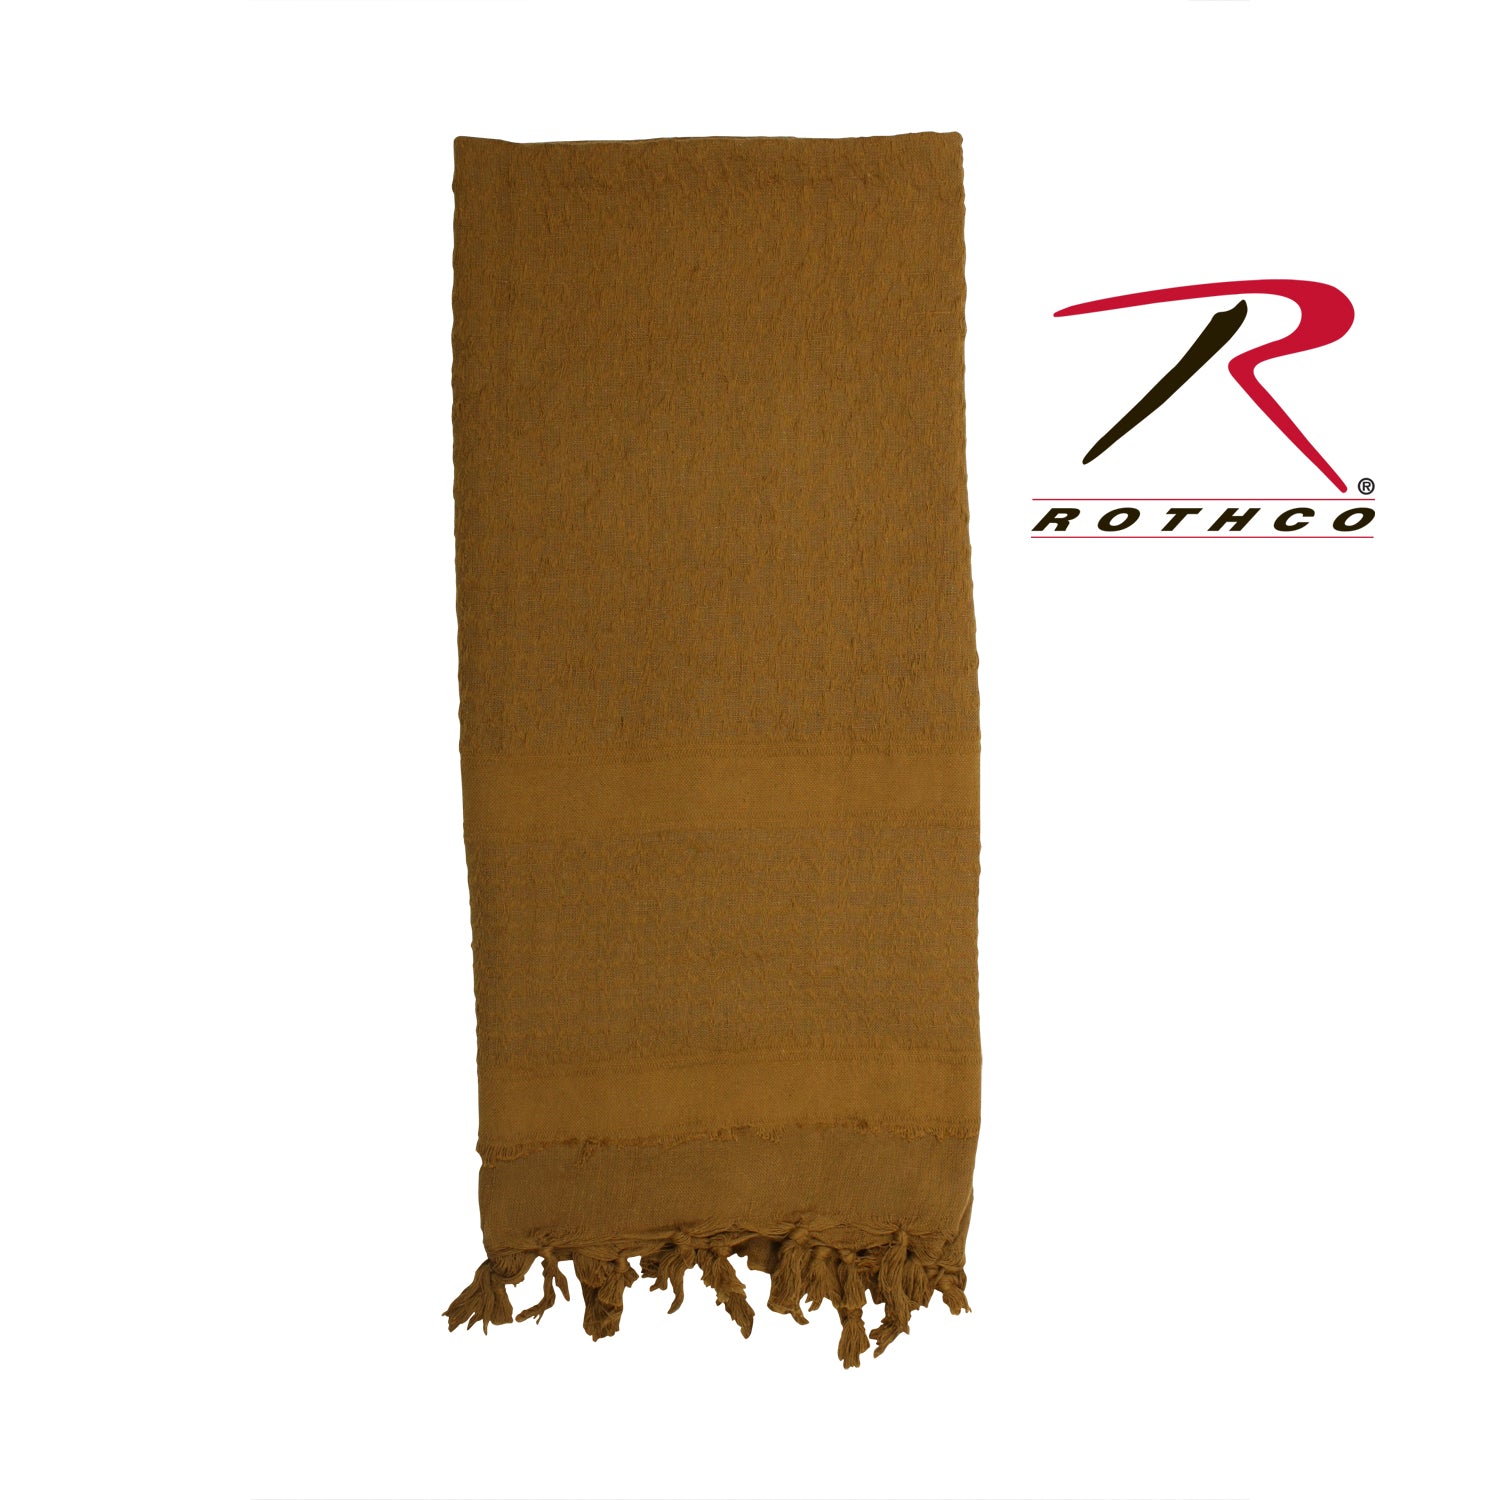 Rothco Solid Color Shemagh Tactical Desert Keffiyeh Scarf - Eminent Paintball And Airsoft